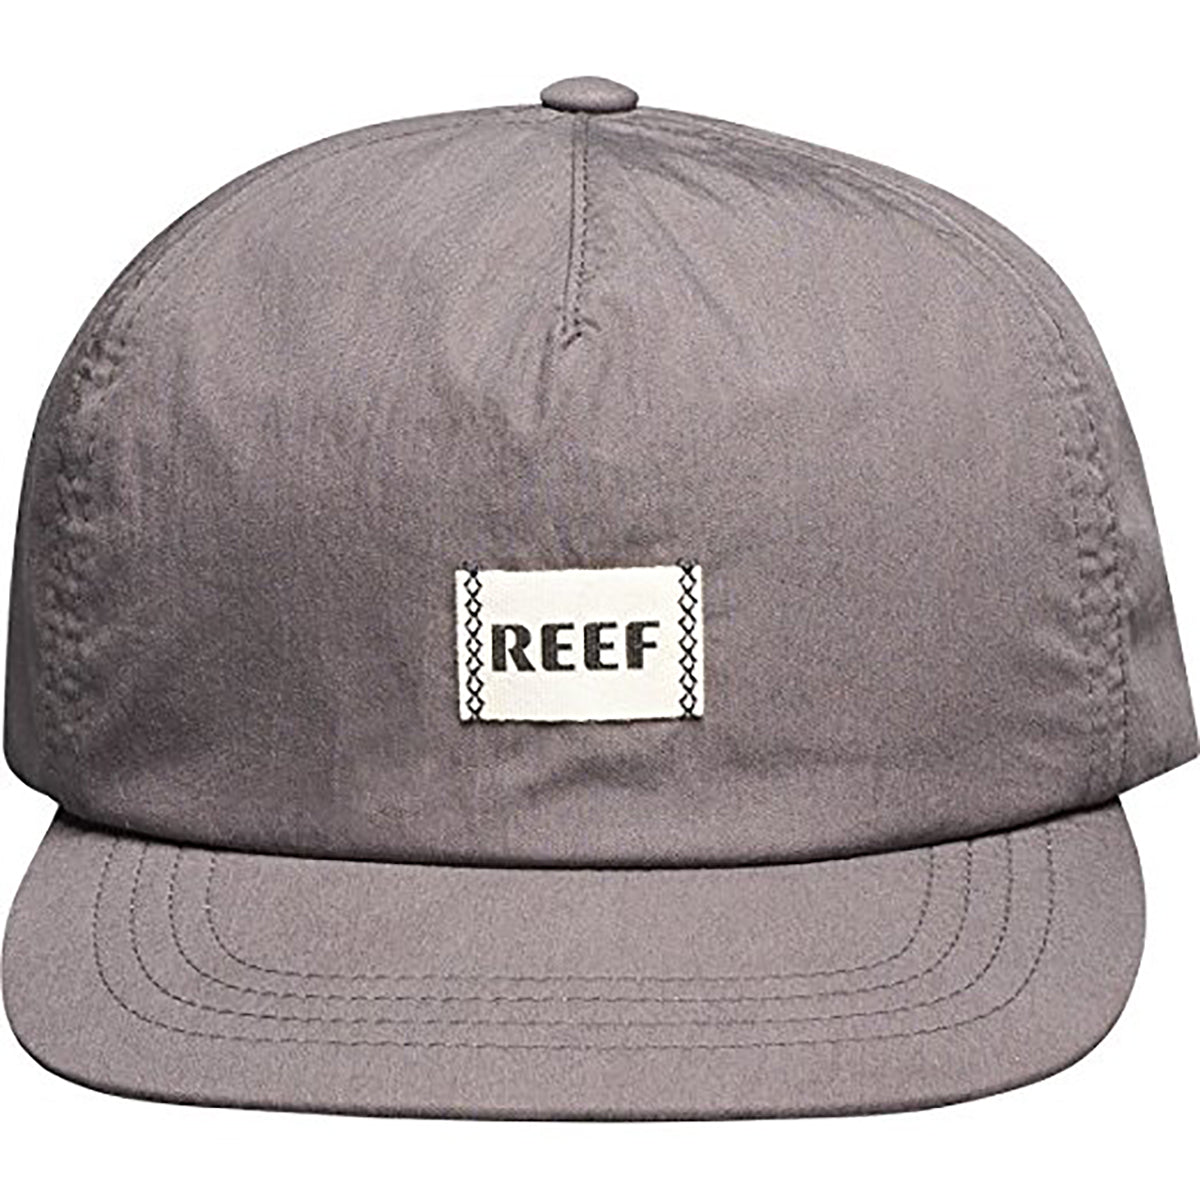 Reef Direct Hat Charcoal OS